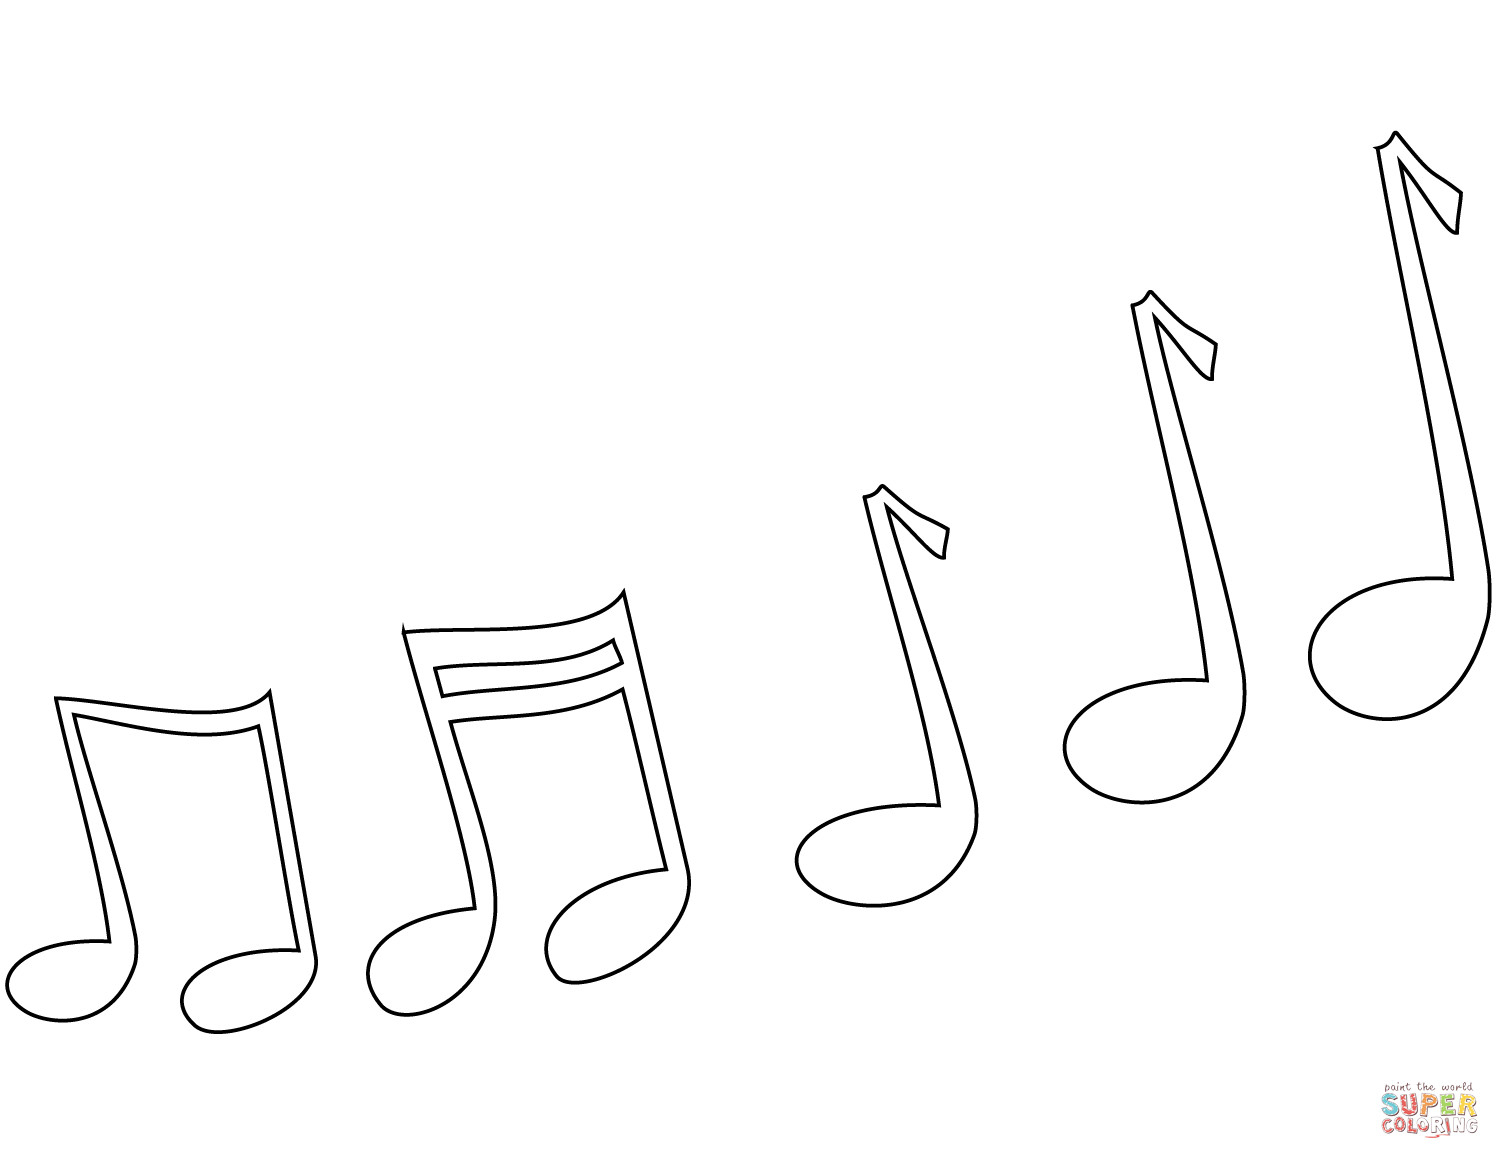 Melody Coloring Pages Melody Coloring Page For Music Notes Coloring Pages Coloring Pages